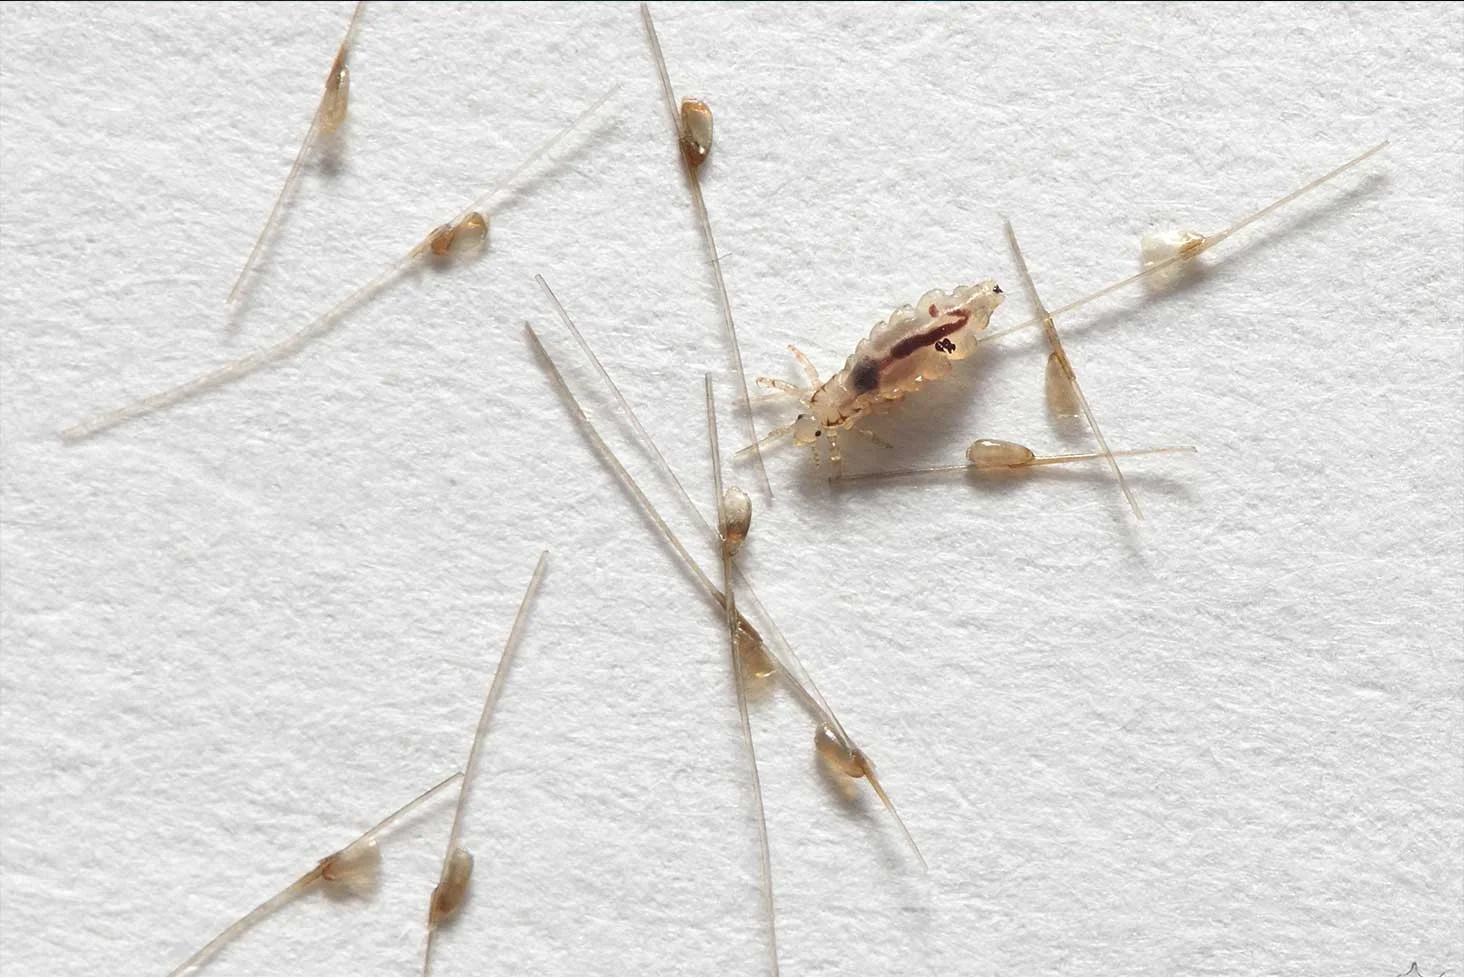 How Lice Live – Understanding Head Lice can help - Lice Clinics of America